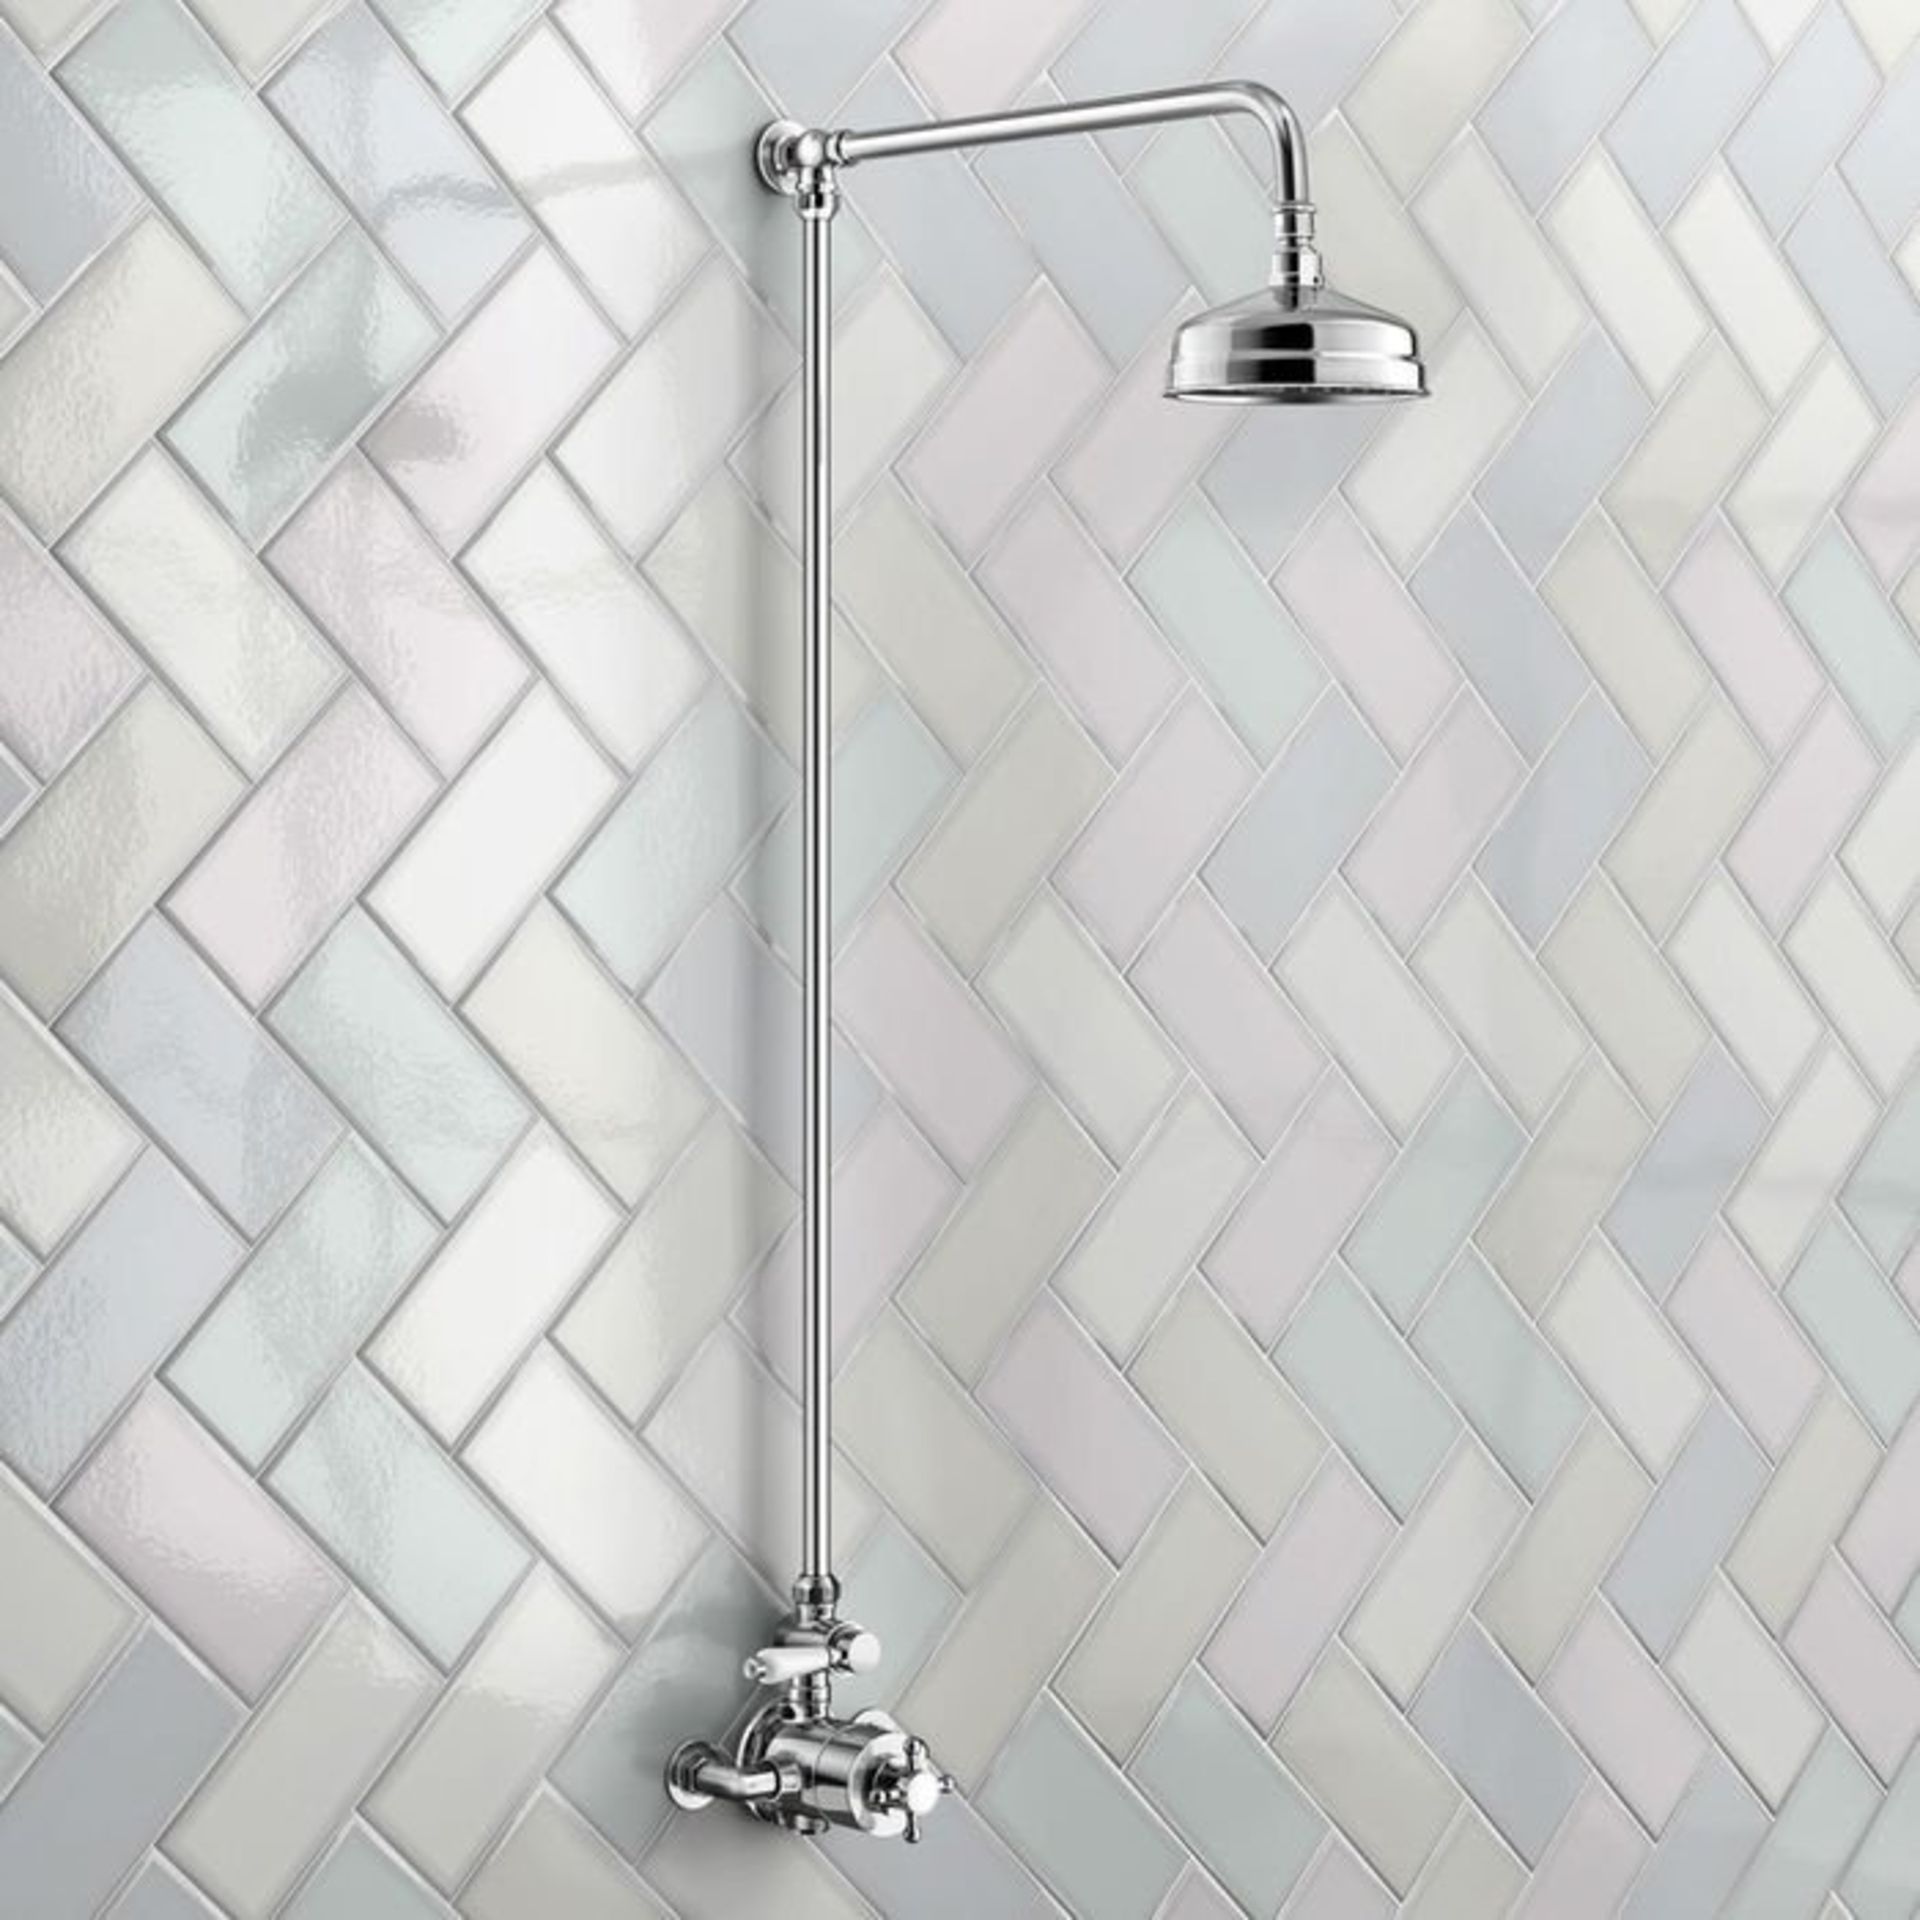 (H27) Traditional Exposed Thermostatic Shower Kit & Medium Head. Traditional exposed valve completes - Image 2 of 6